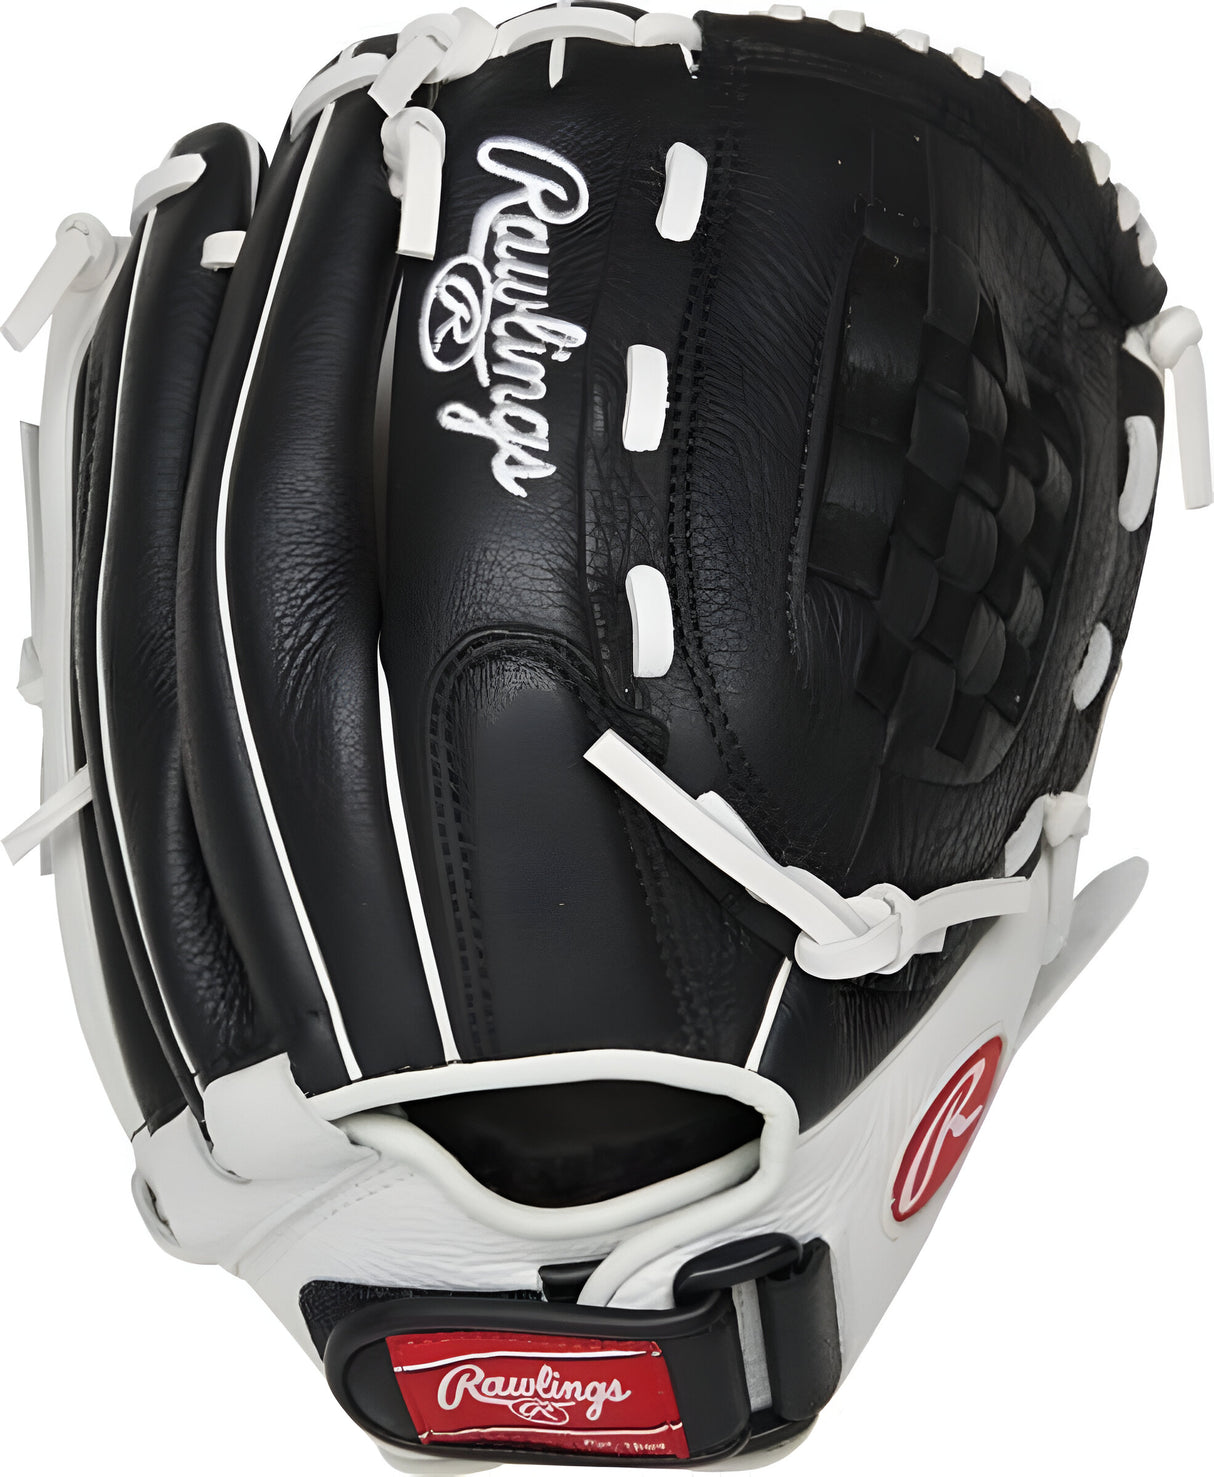 Softball Glove - Shut Out - Fully made of leather